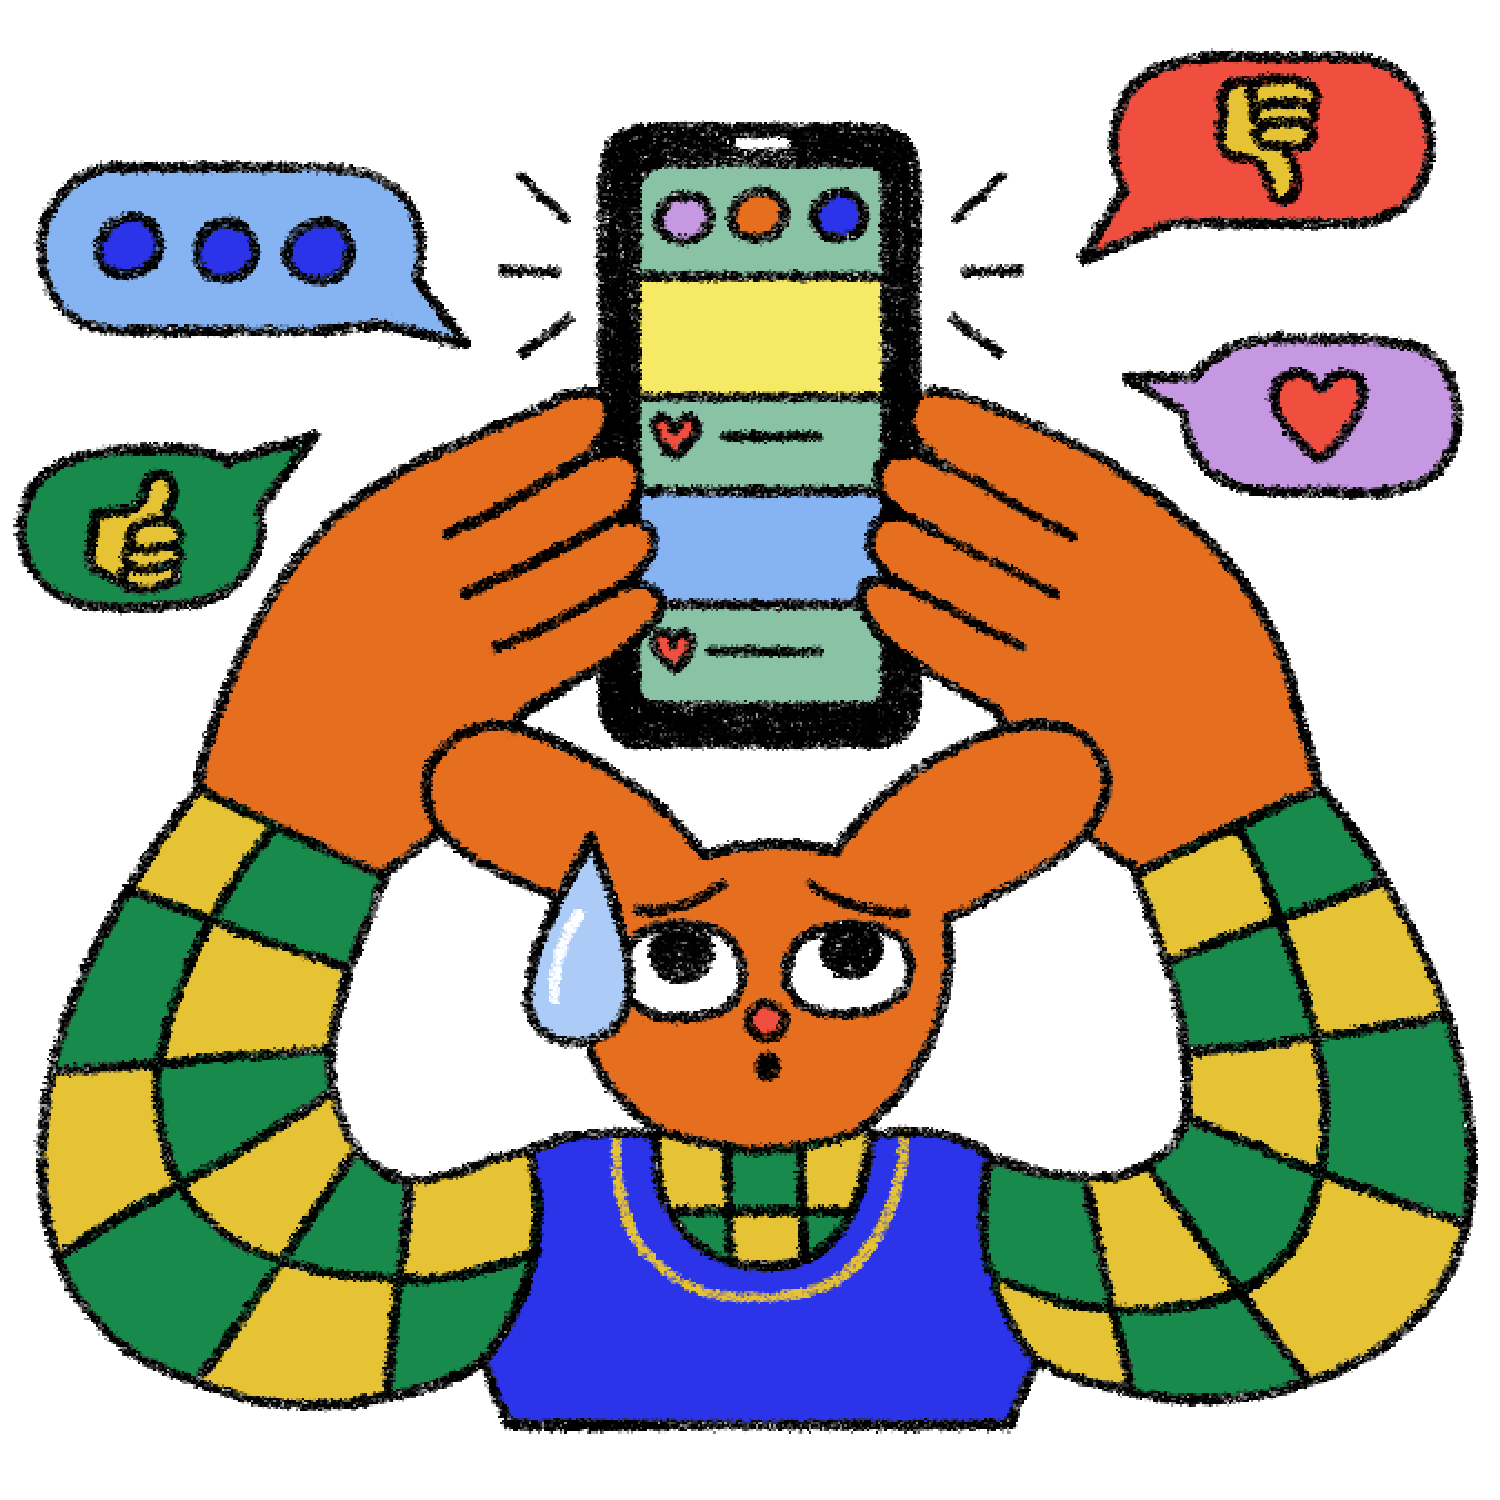 An illustration of an animal using an iPhone to schedule social media posts